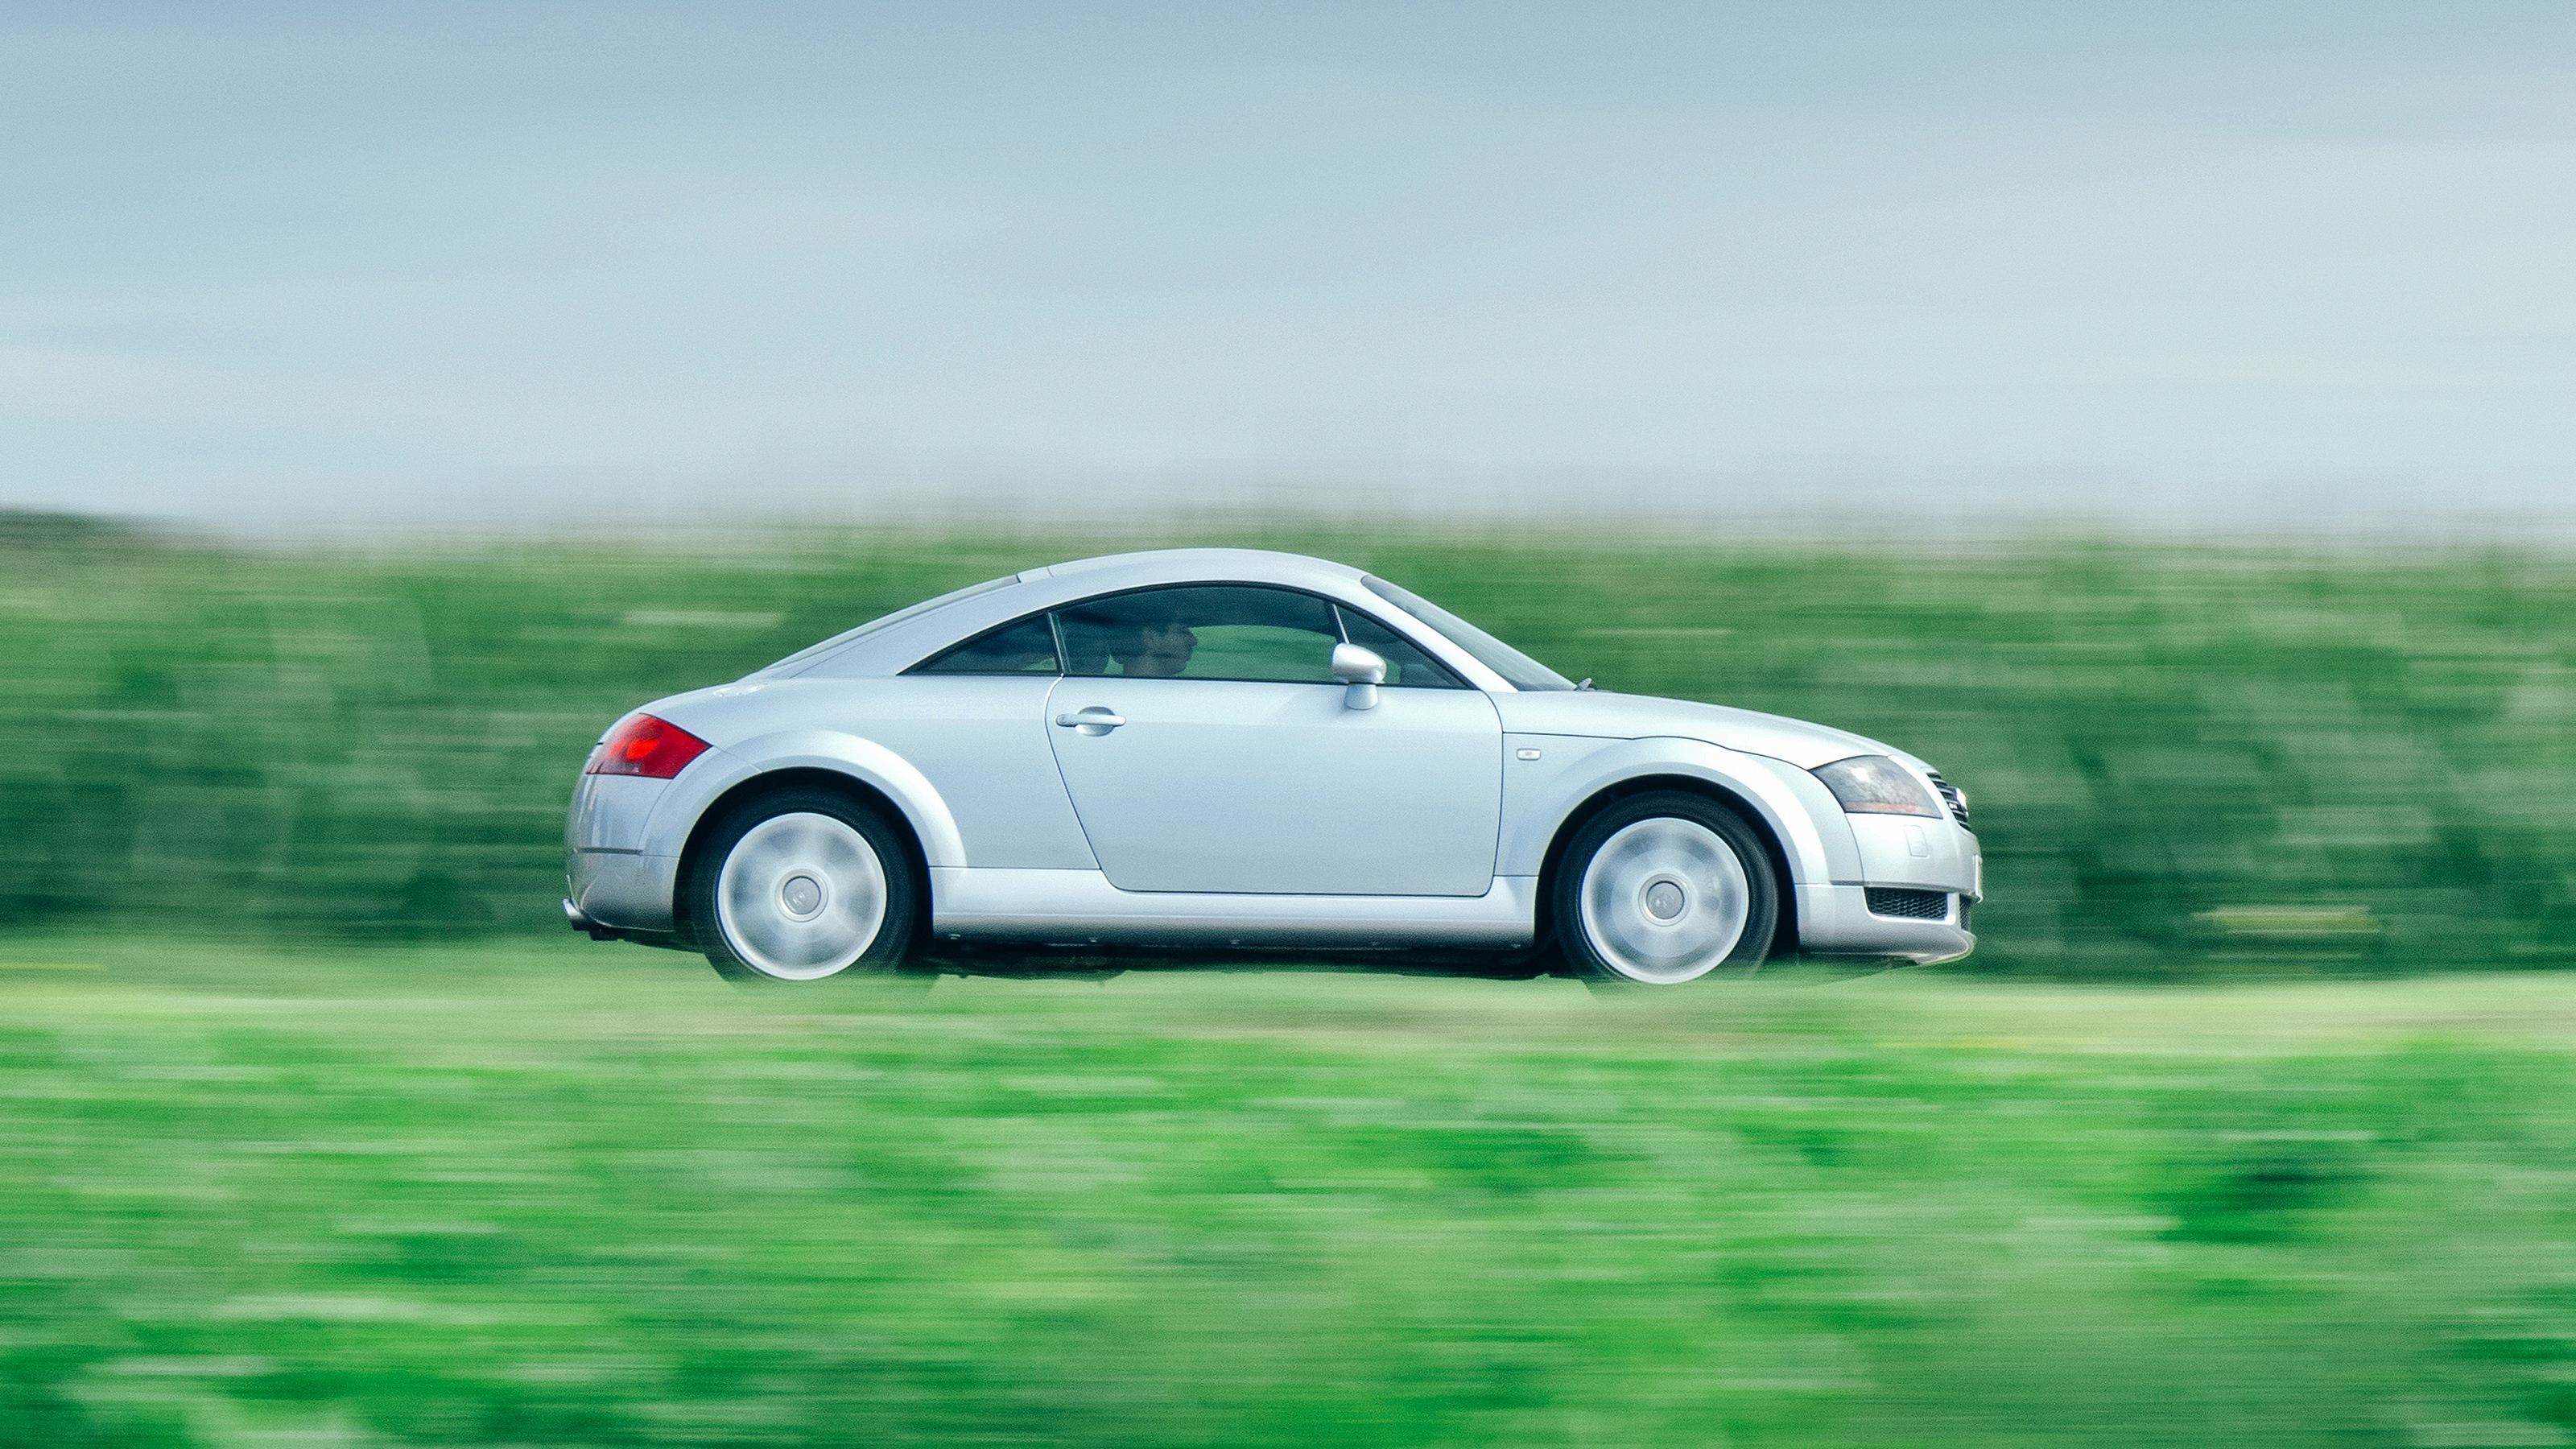 TT at 25: Audi's iconic sports car bows out